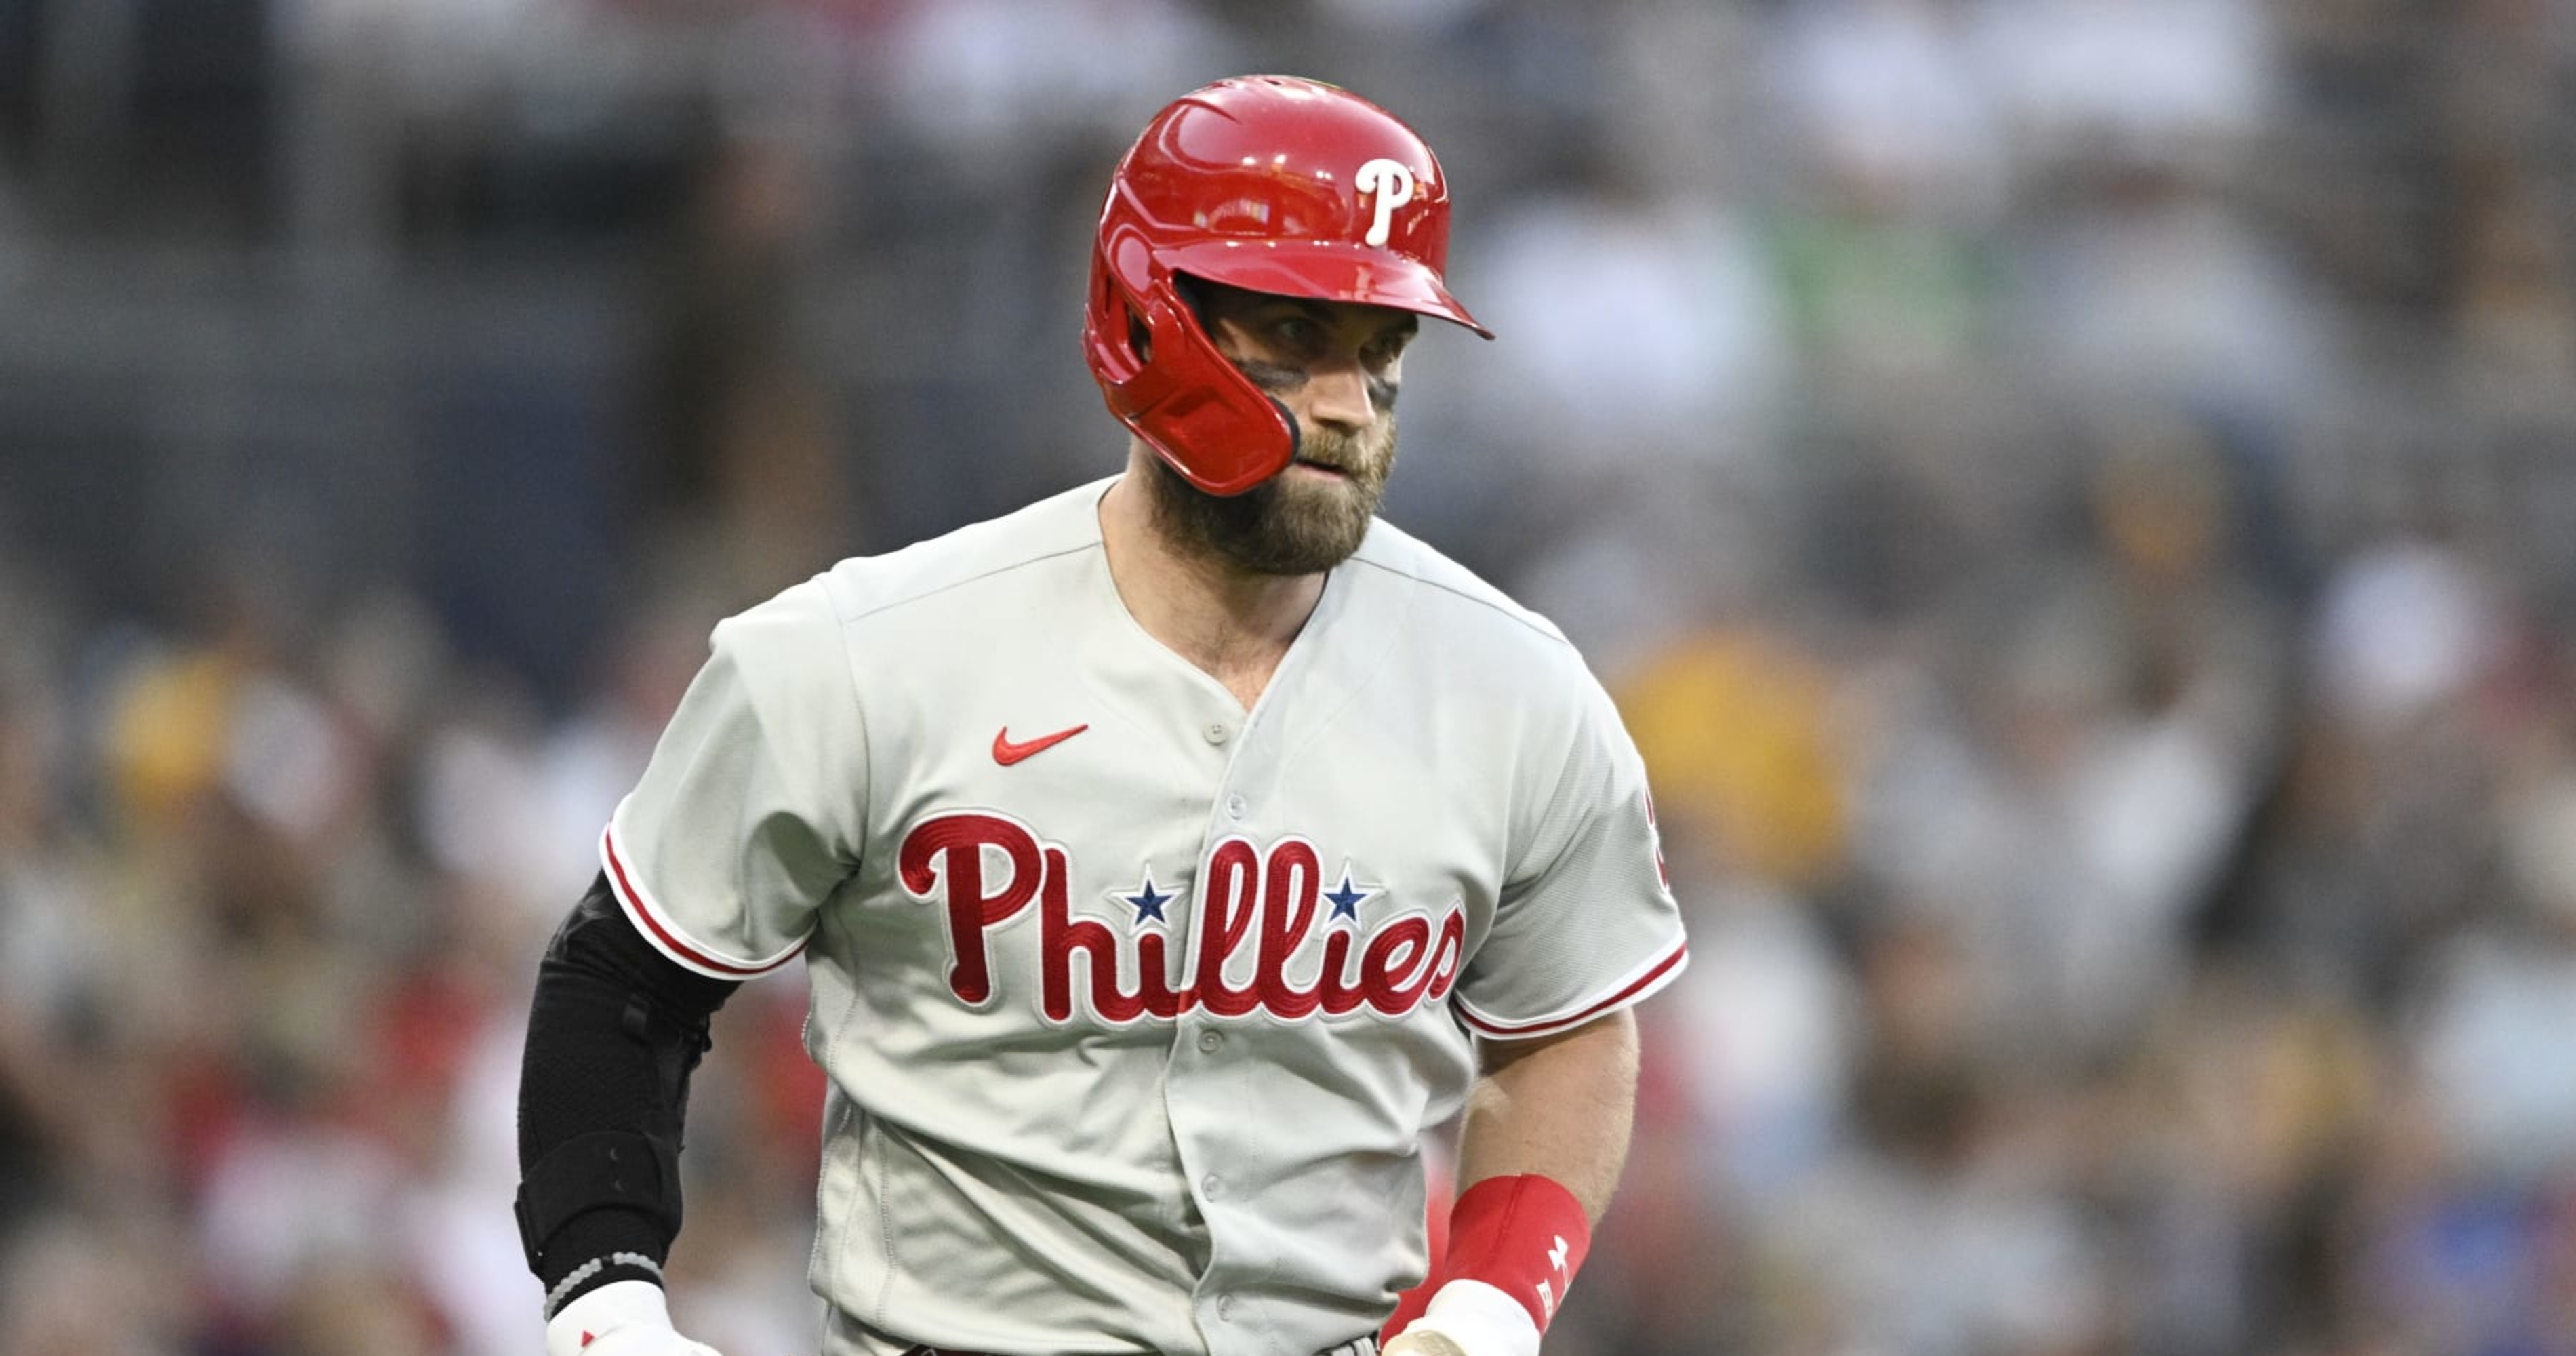 Phillies’ Bryce Harper Says He Hopes to Return from Thumb Injury in September